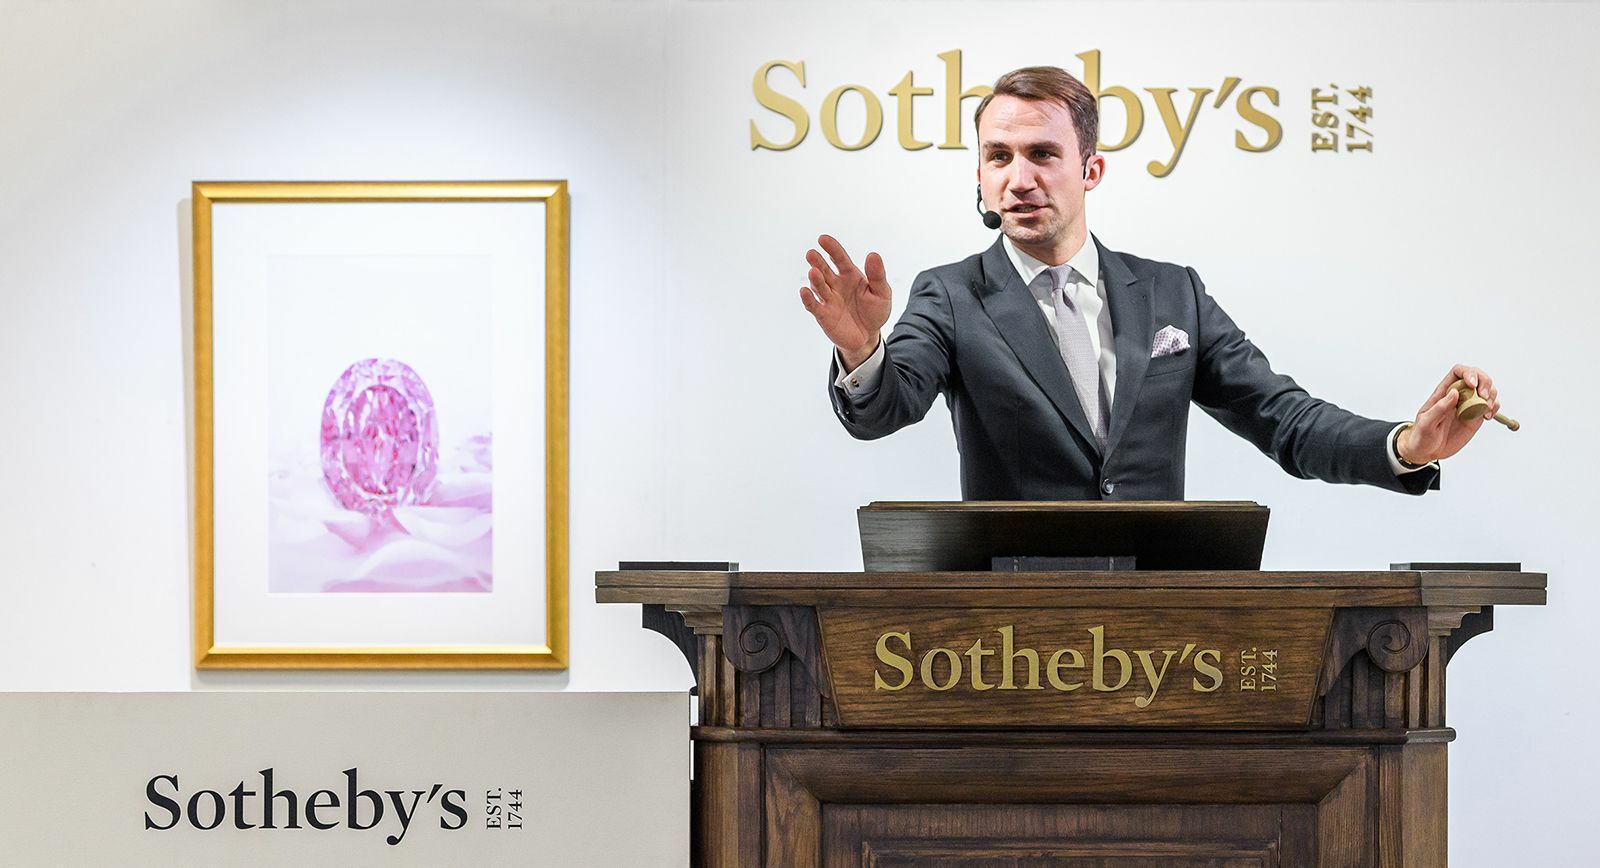 Sotheby's auction of The Spirit of the Rose Fancy Vivid purple-pink diamond